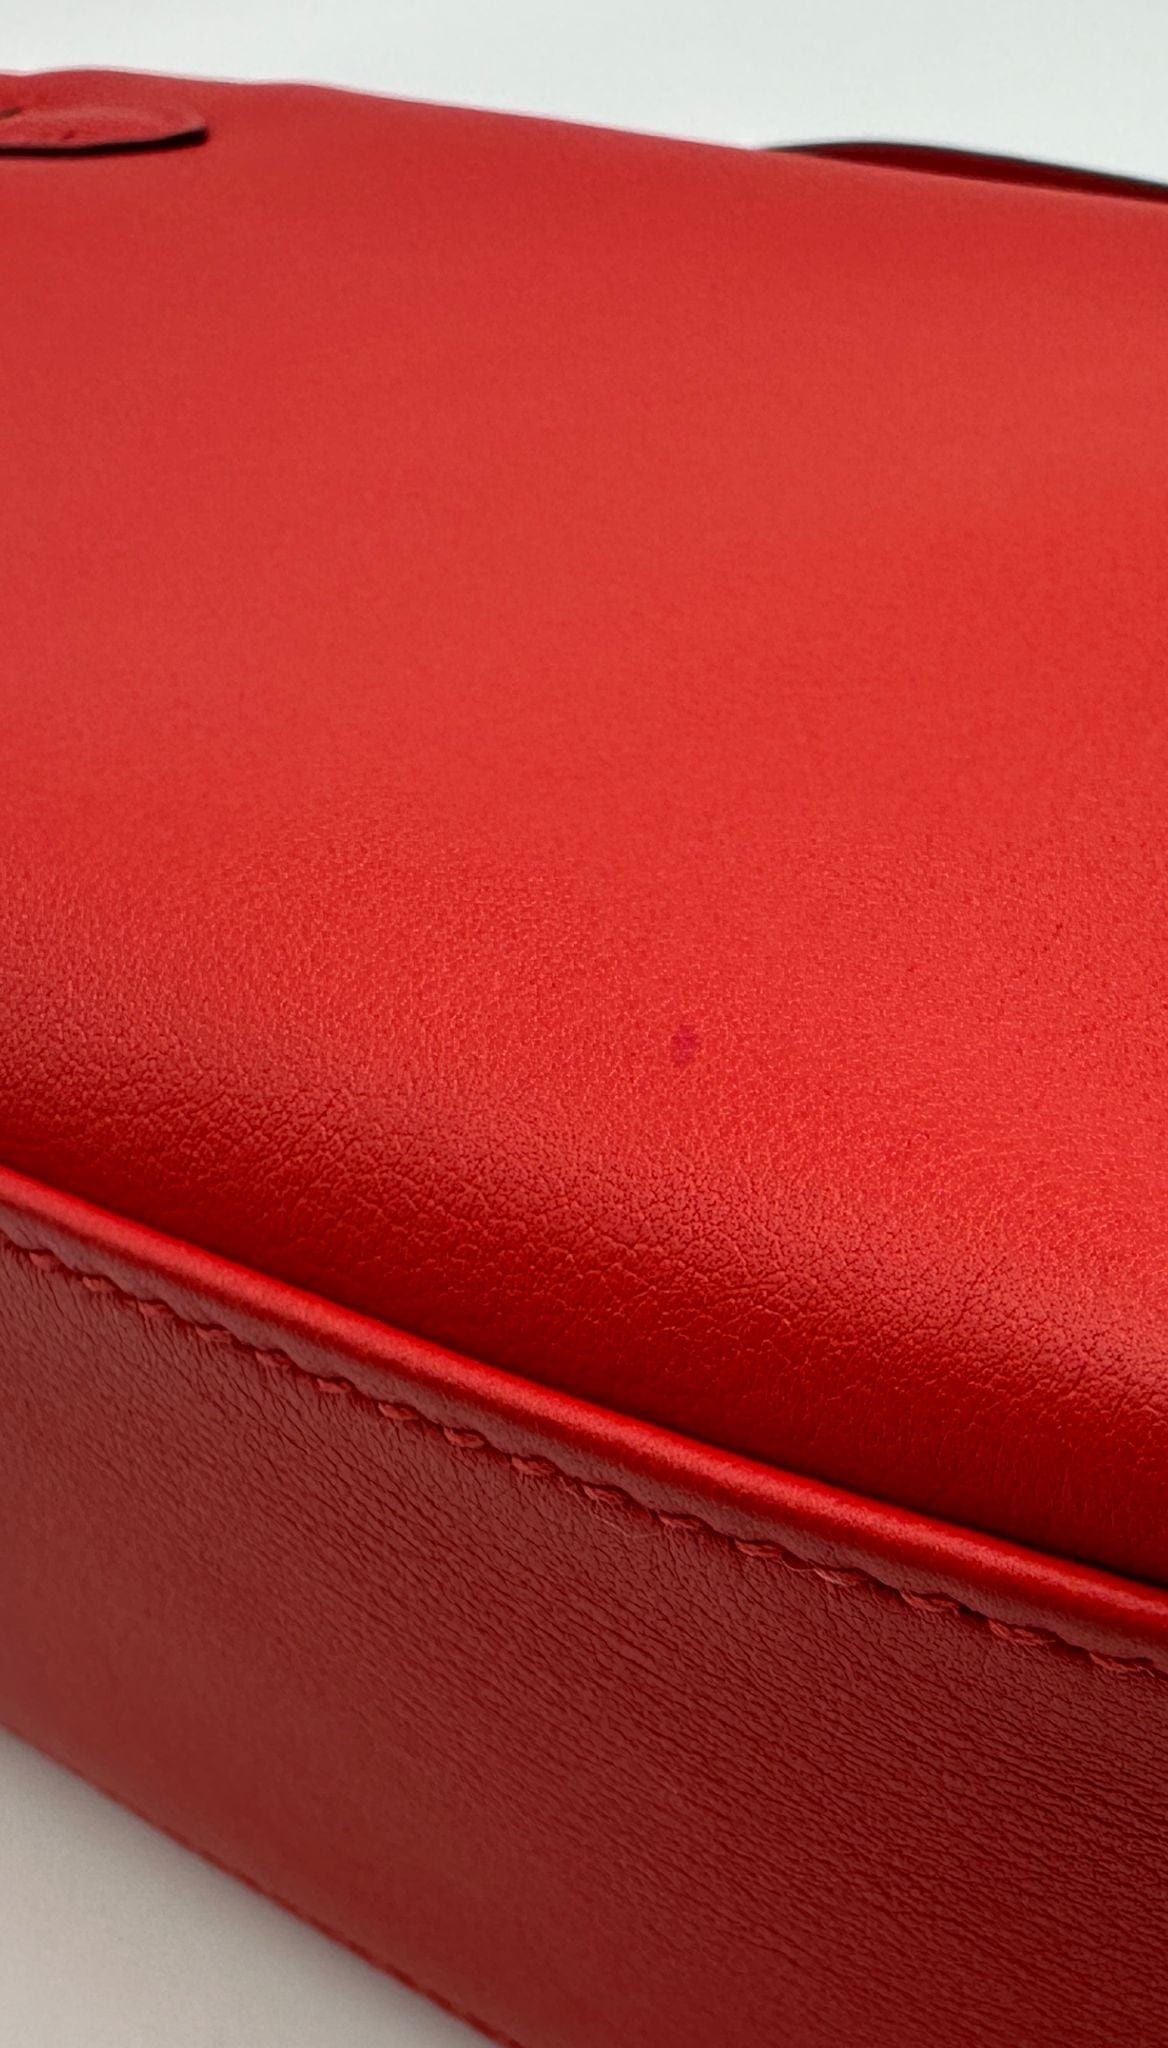 Hermès PRELOVED RARE HERMÈS KELLY POCHETTE ROUGE TOMATE Swift Leather with Gold Hardware